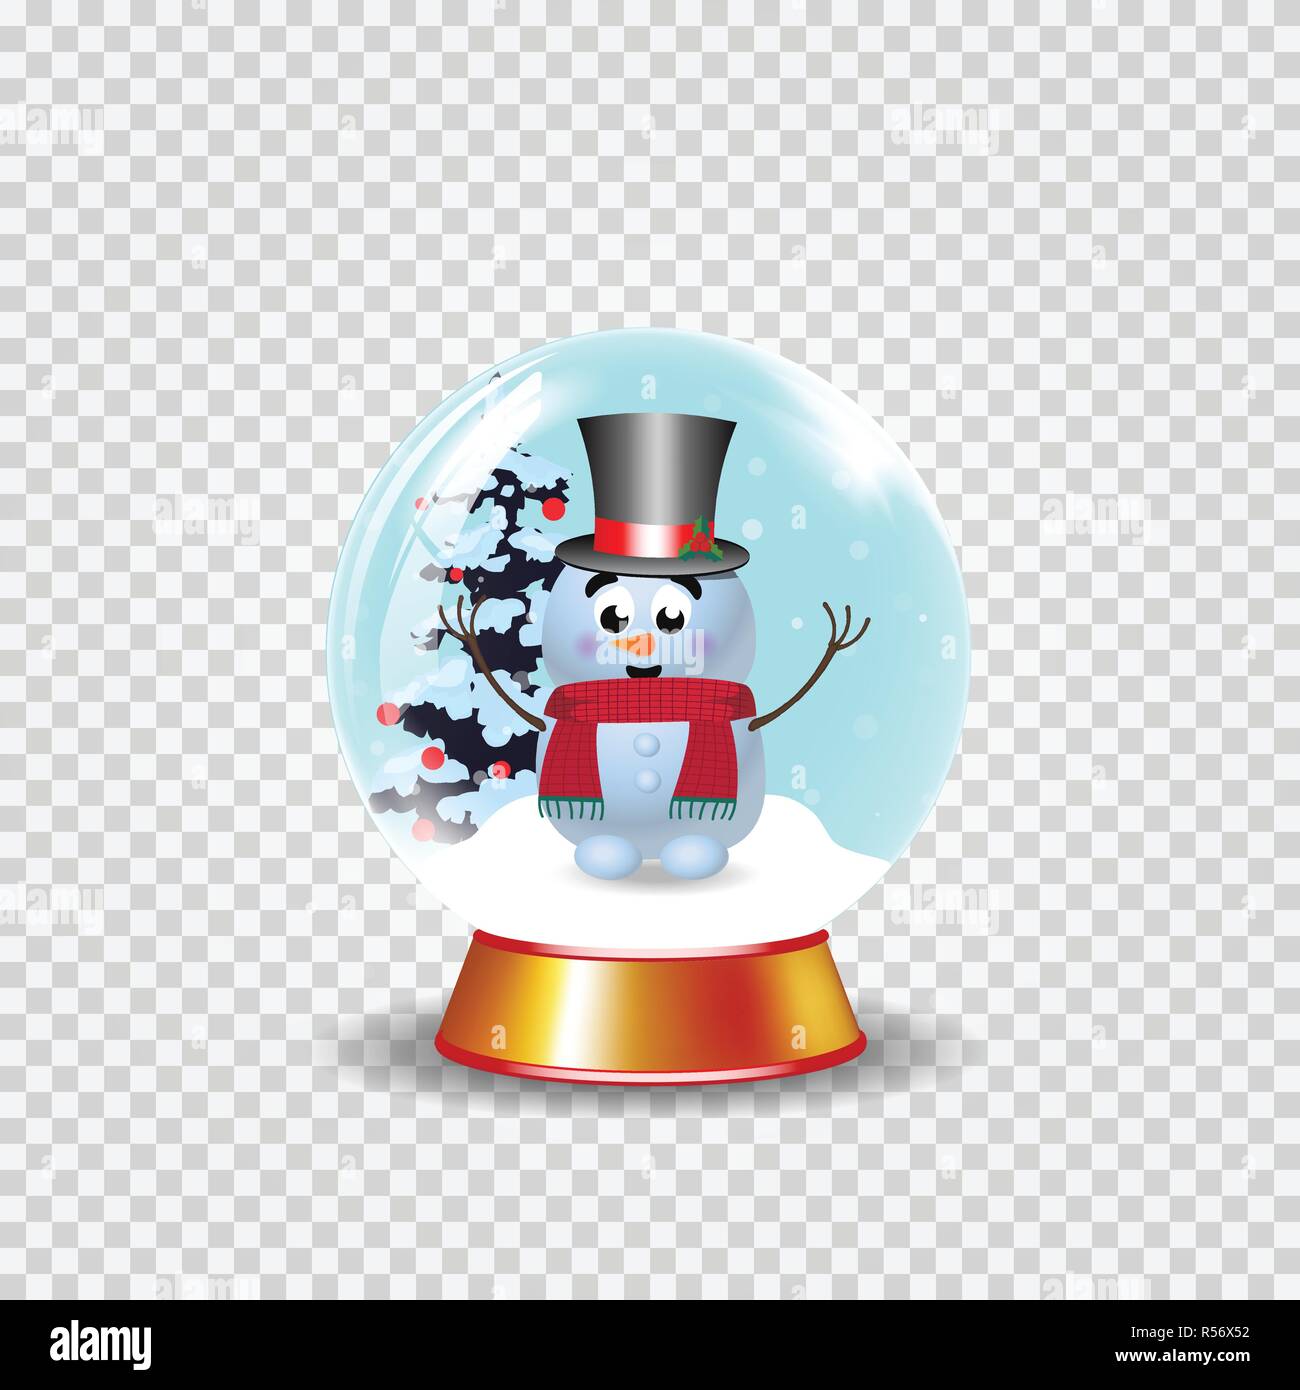 Christmas New Year Crystal Snow Globe With Cute Snowman In Top Hat And Fir Tree Isolated On Transparent Background Vector Cartoon Illustration Icon Stock Vector Image Art Alamy